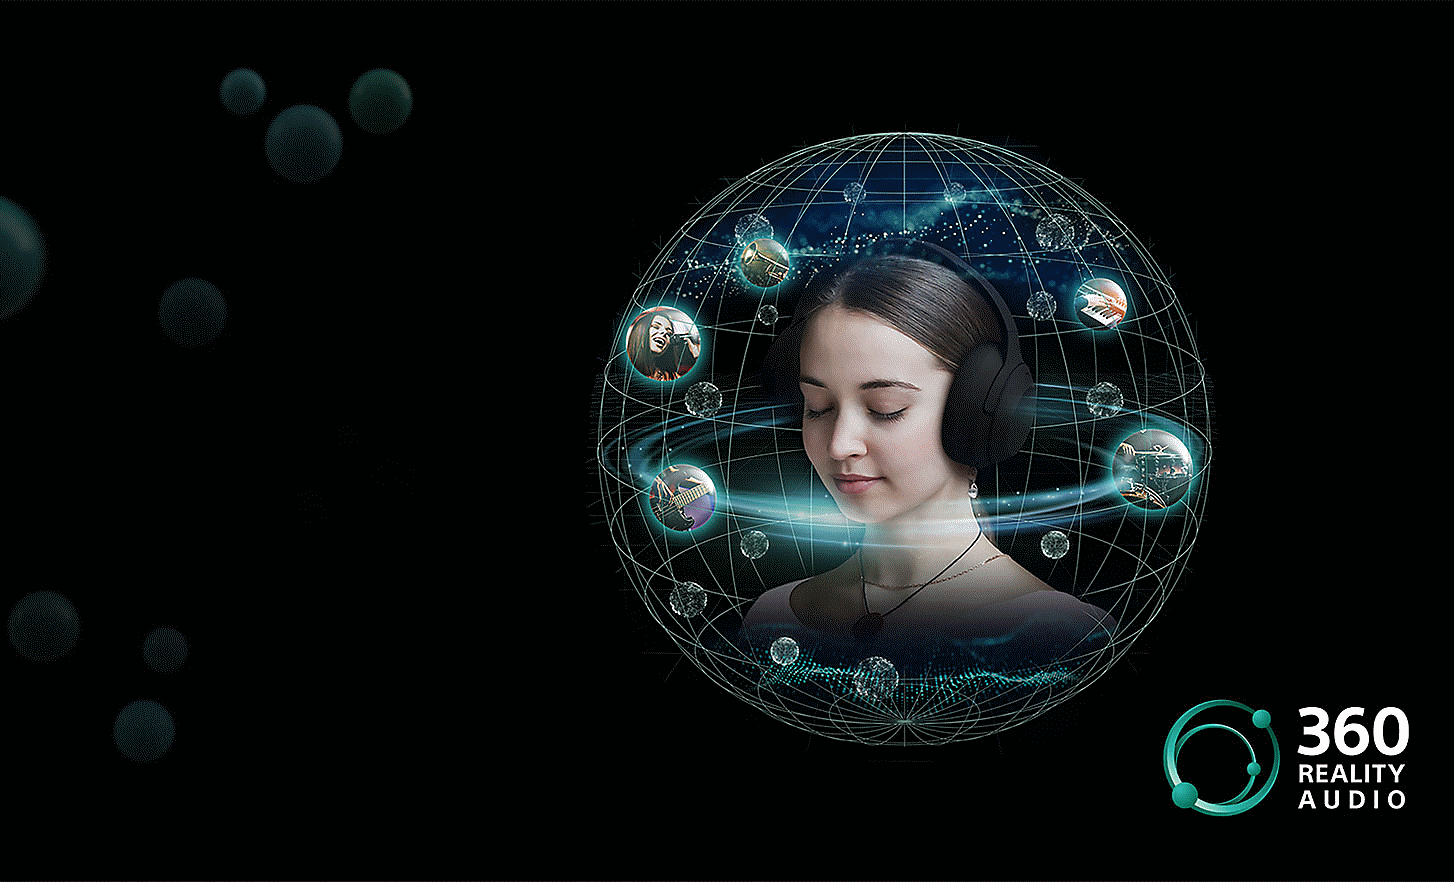 Image of a woman wearing headphones in a globe shaped net with various images circling her head